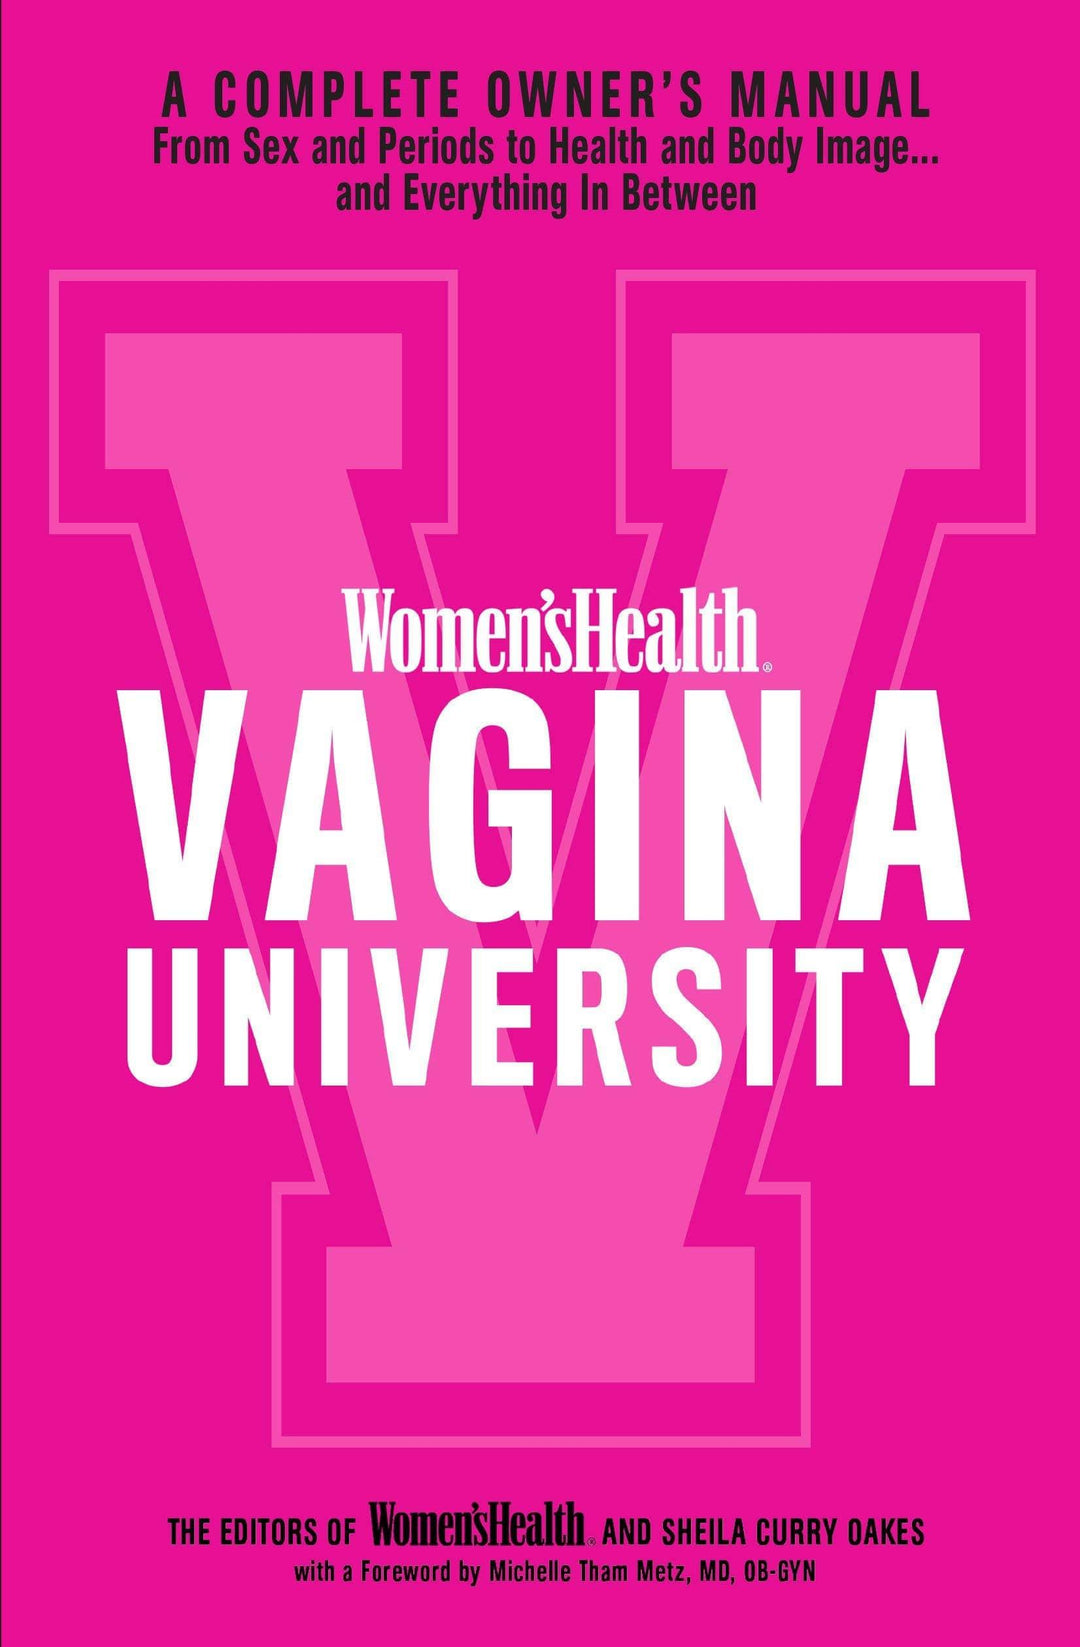 Vagina University: A Complete Owner's Manual - Esme and Elodie